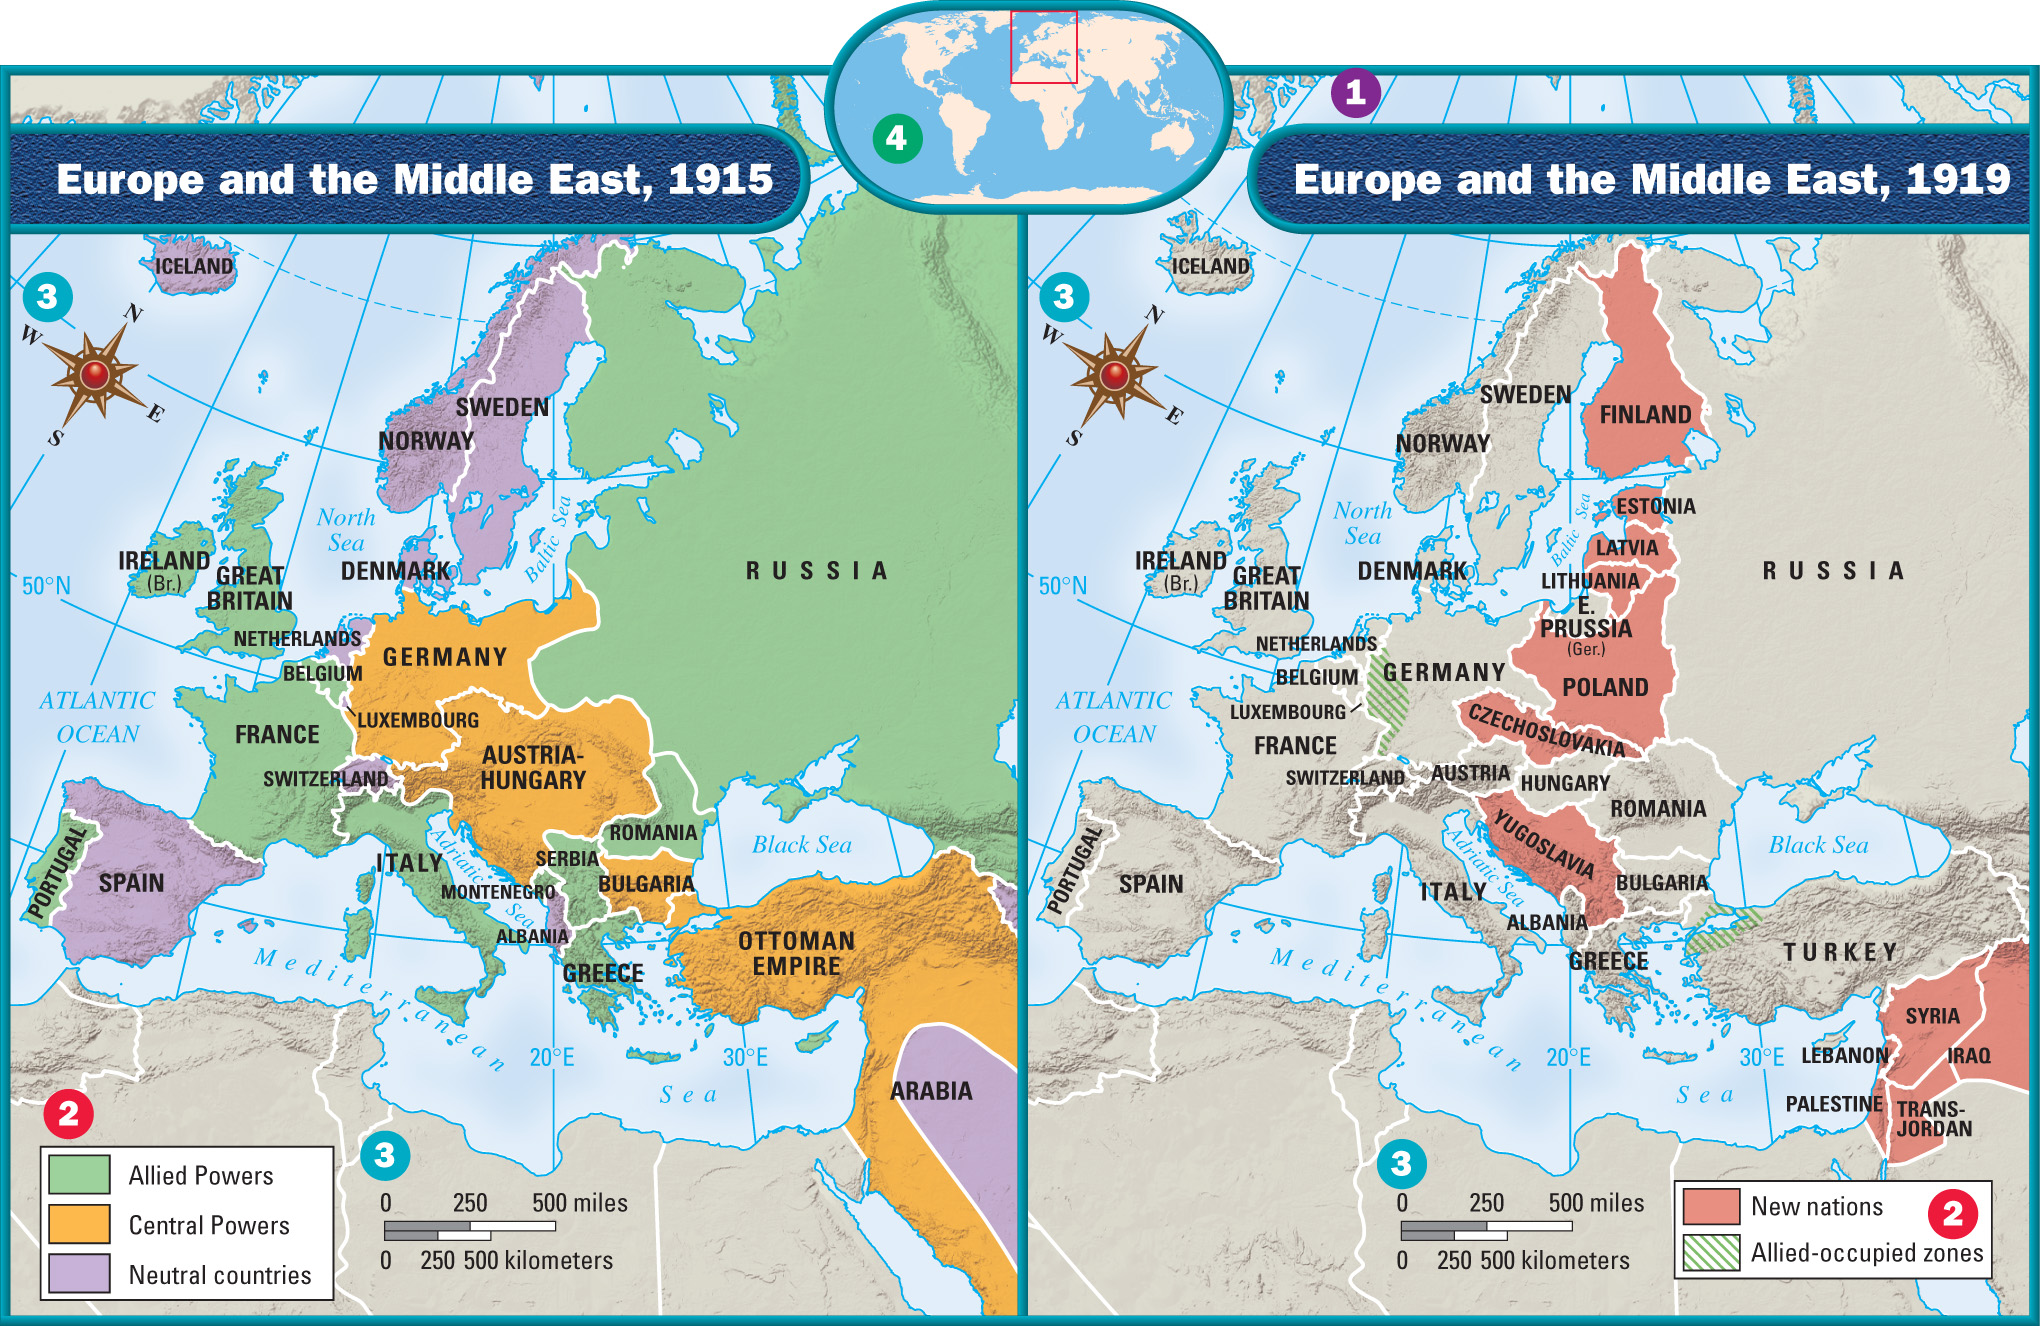 Two maps show Europe and the Middle East in 1915 and in 1918.